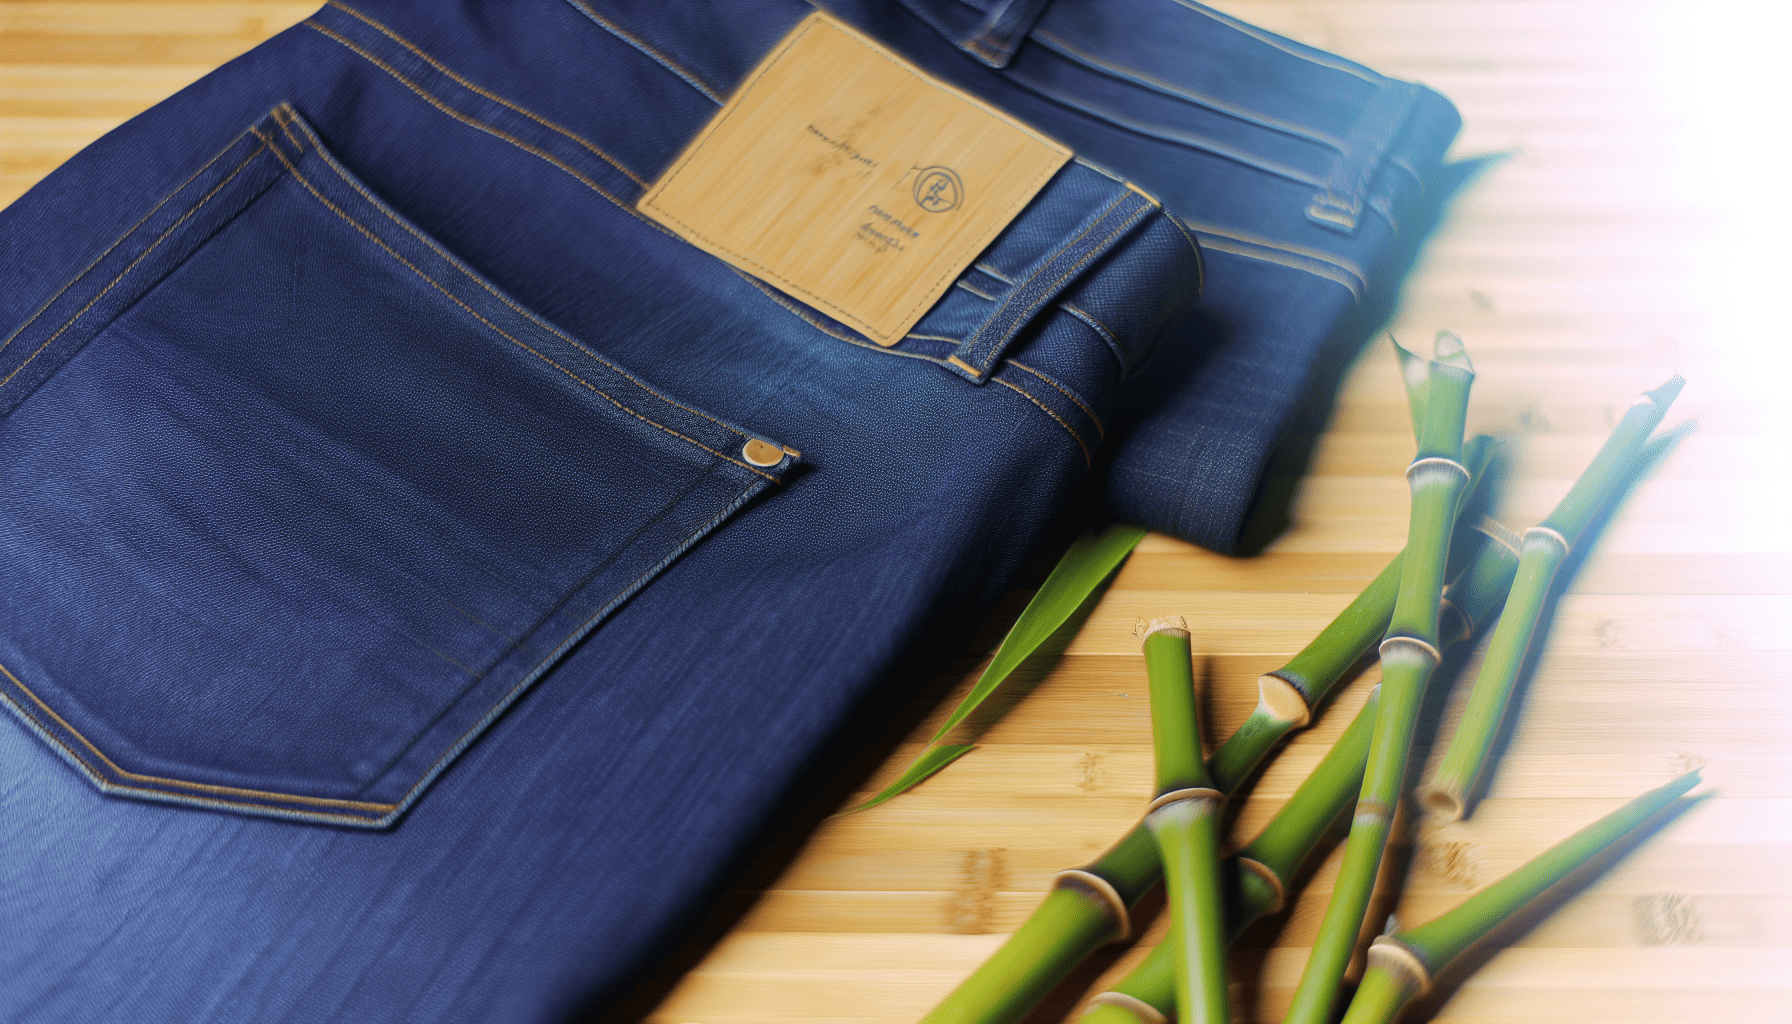 Eco-friendly bamboo denim jeans with sustainable production process